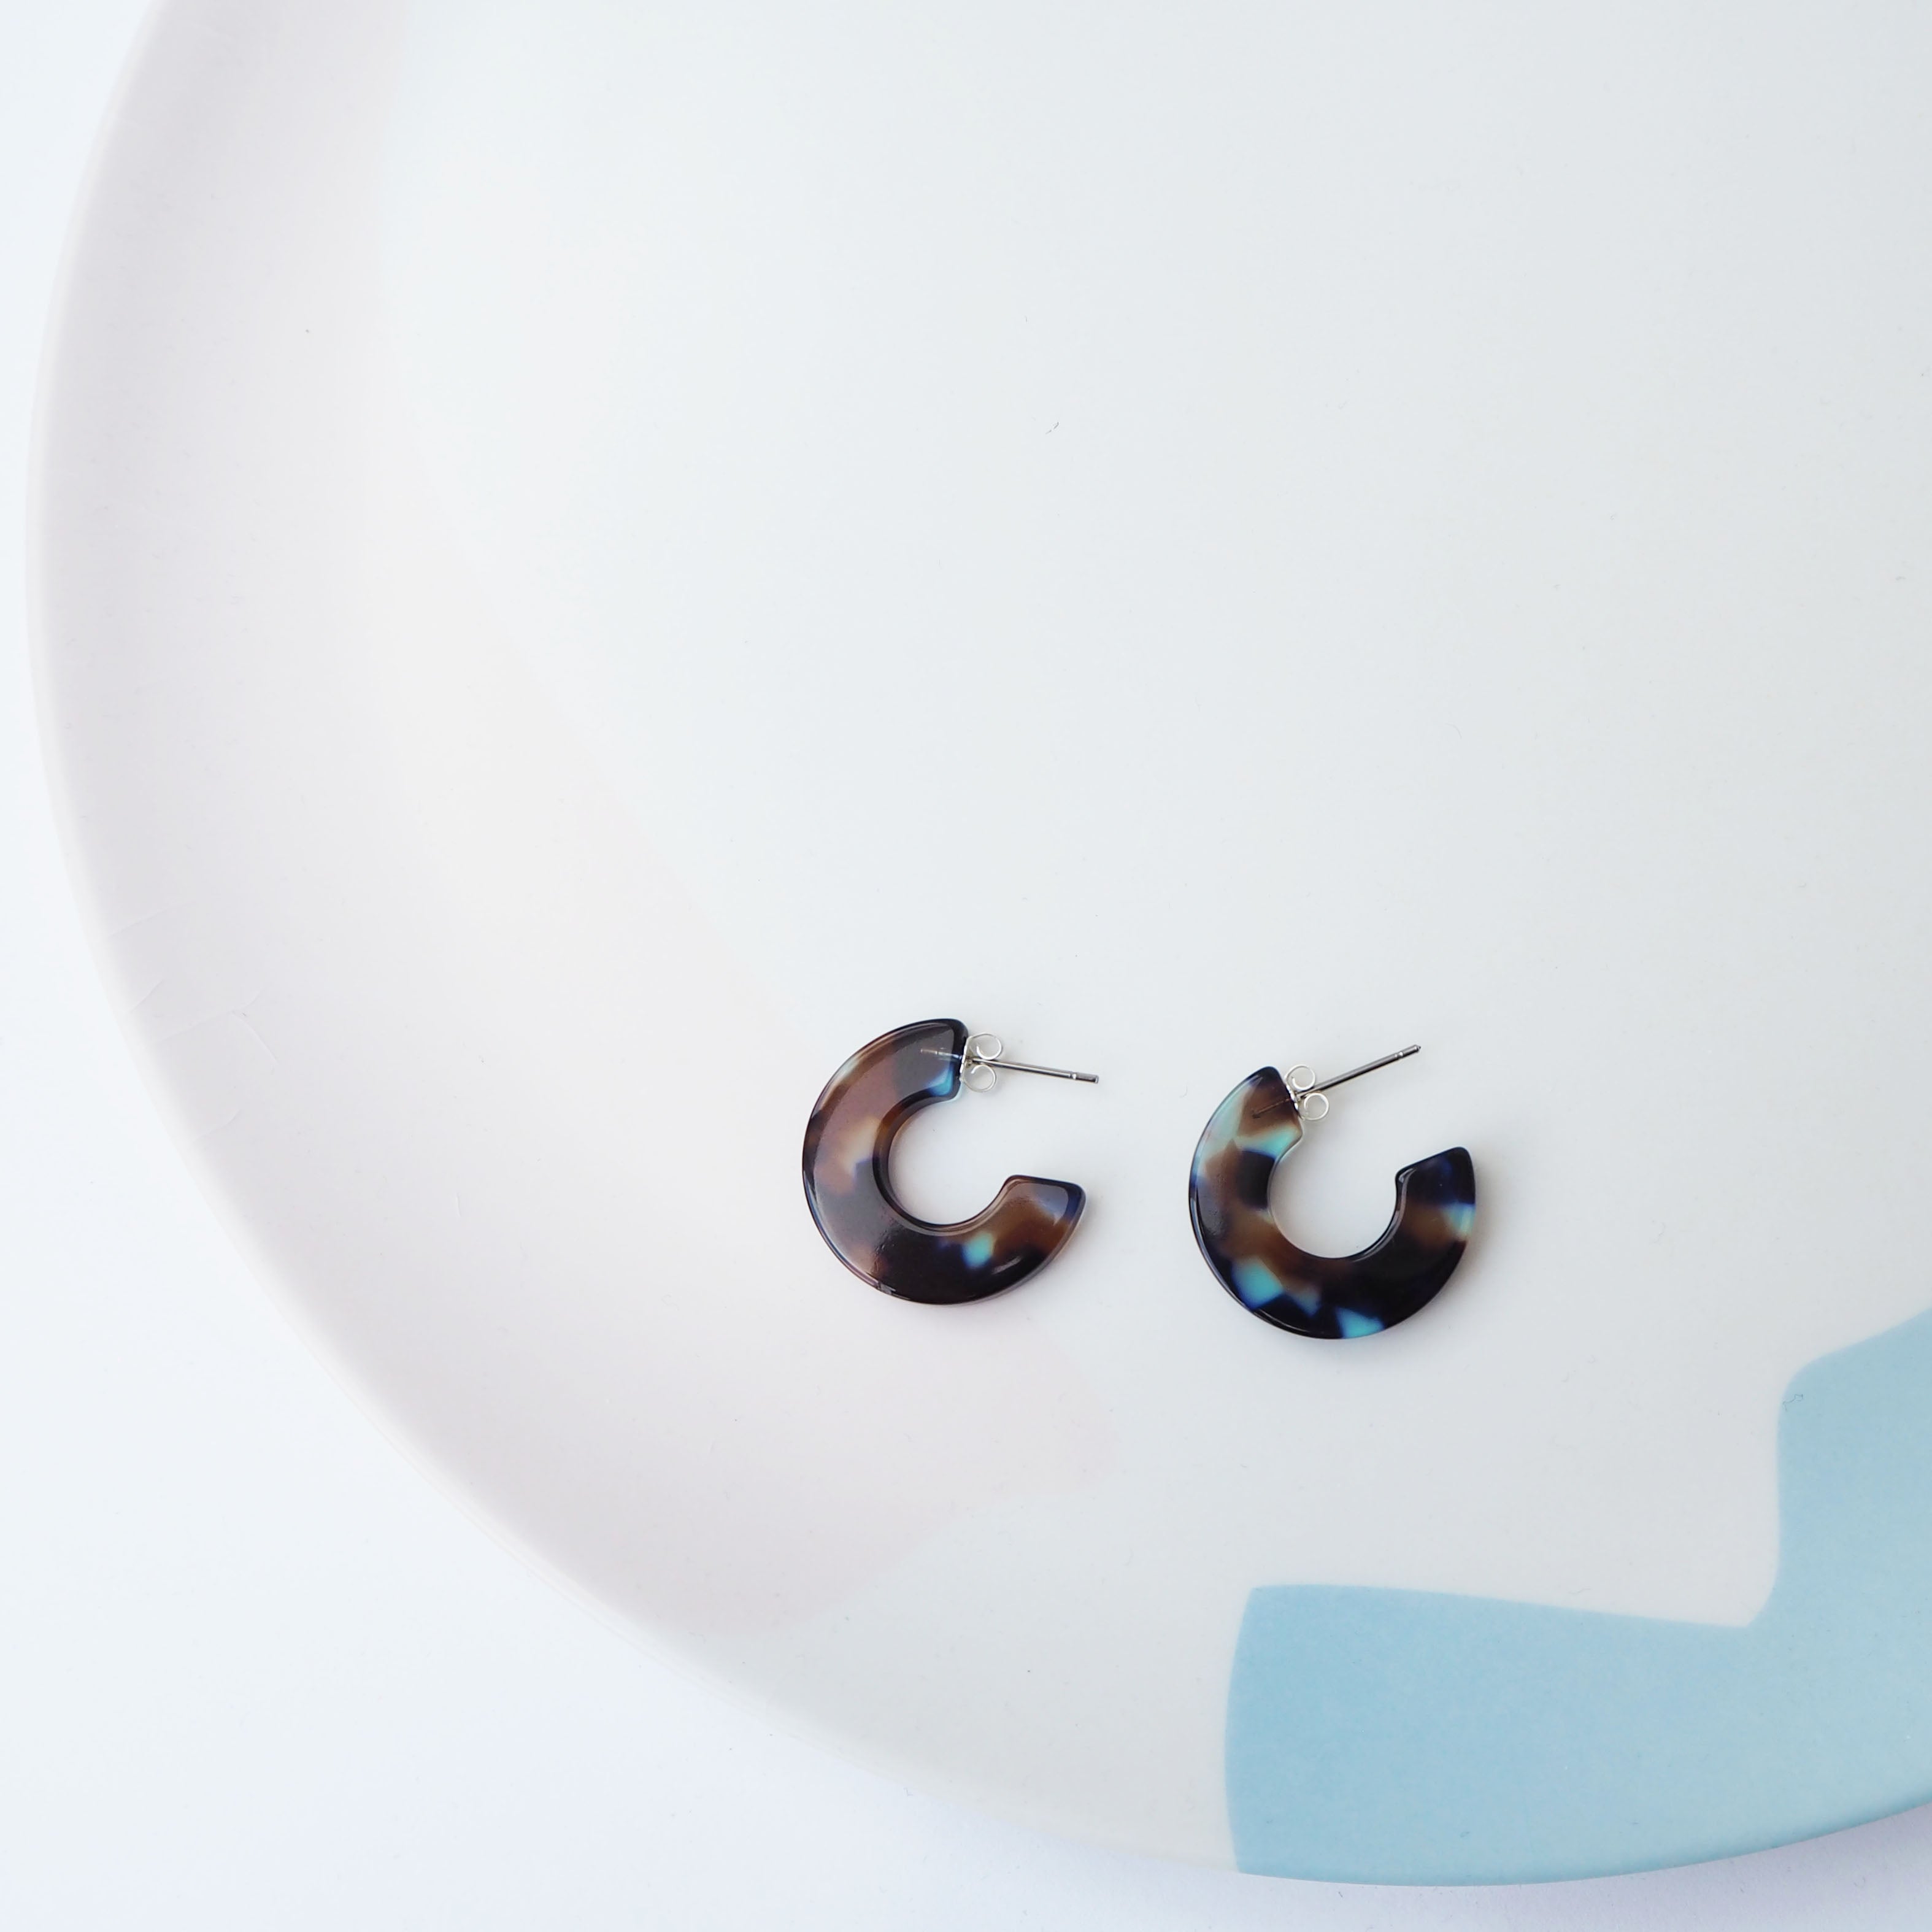 A pair of small acrylic hoop earrings in a mix of clear, blue and dark brown lying flat on a ceramic dish